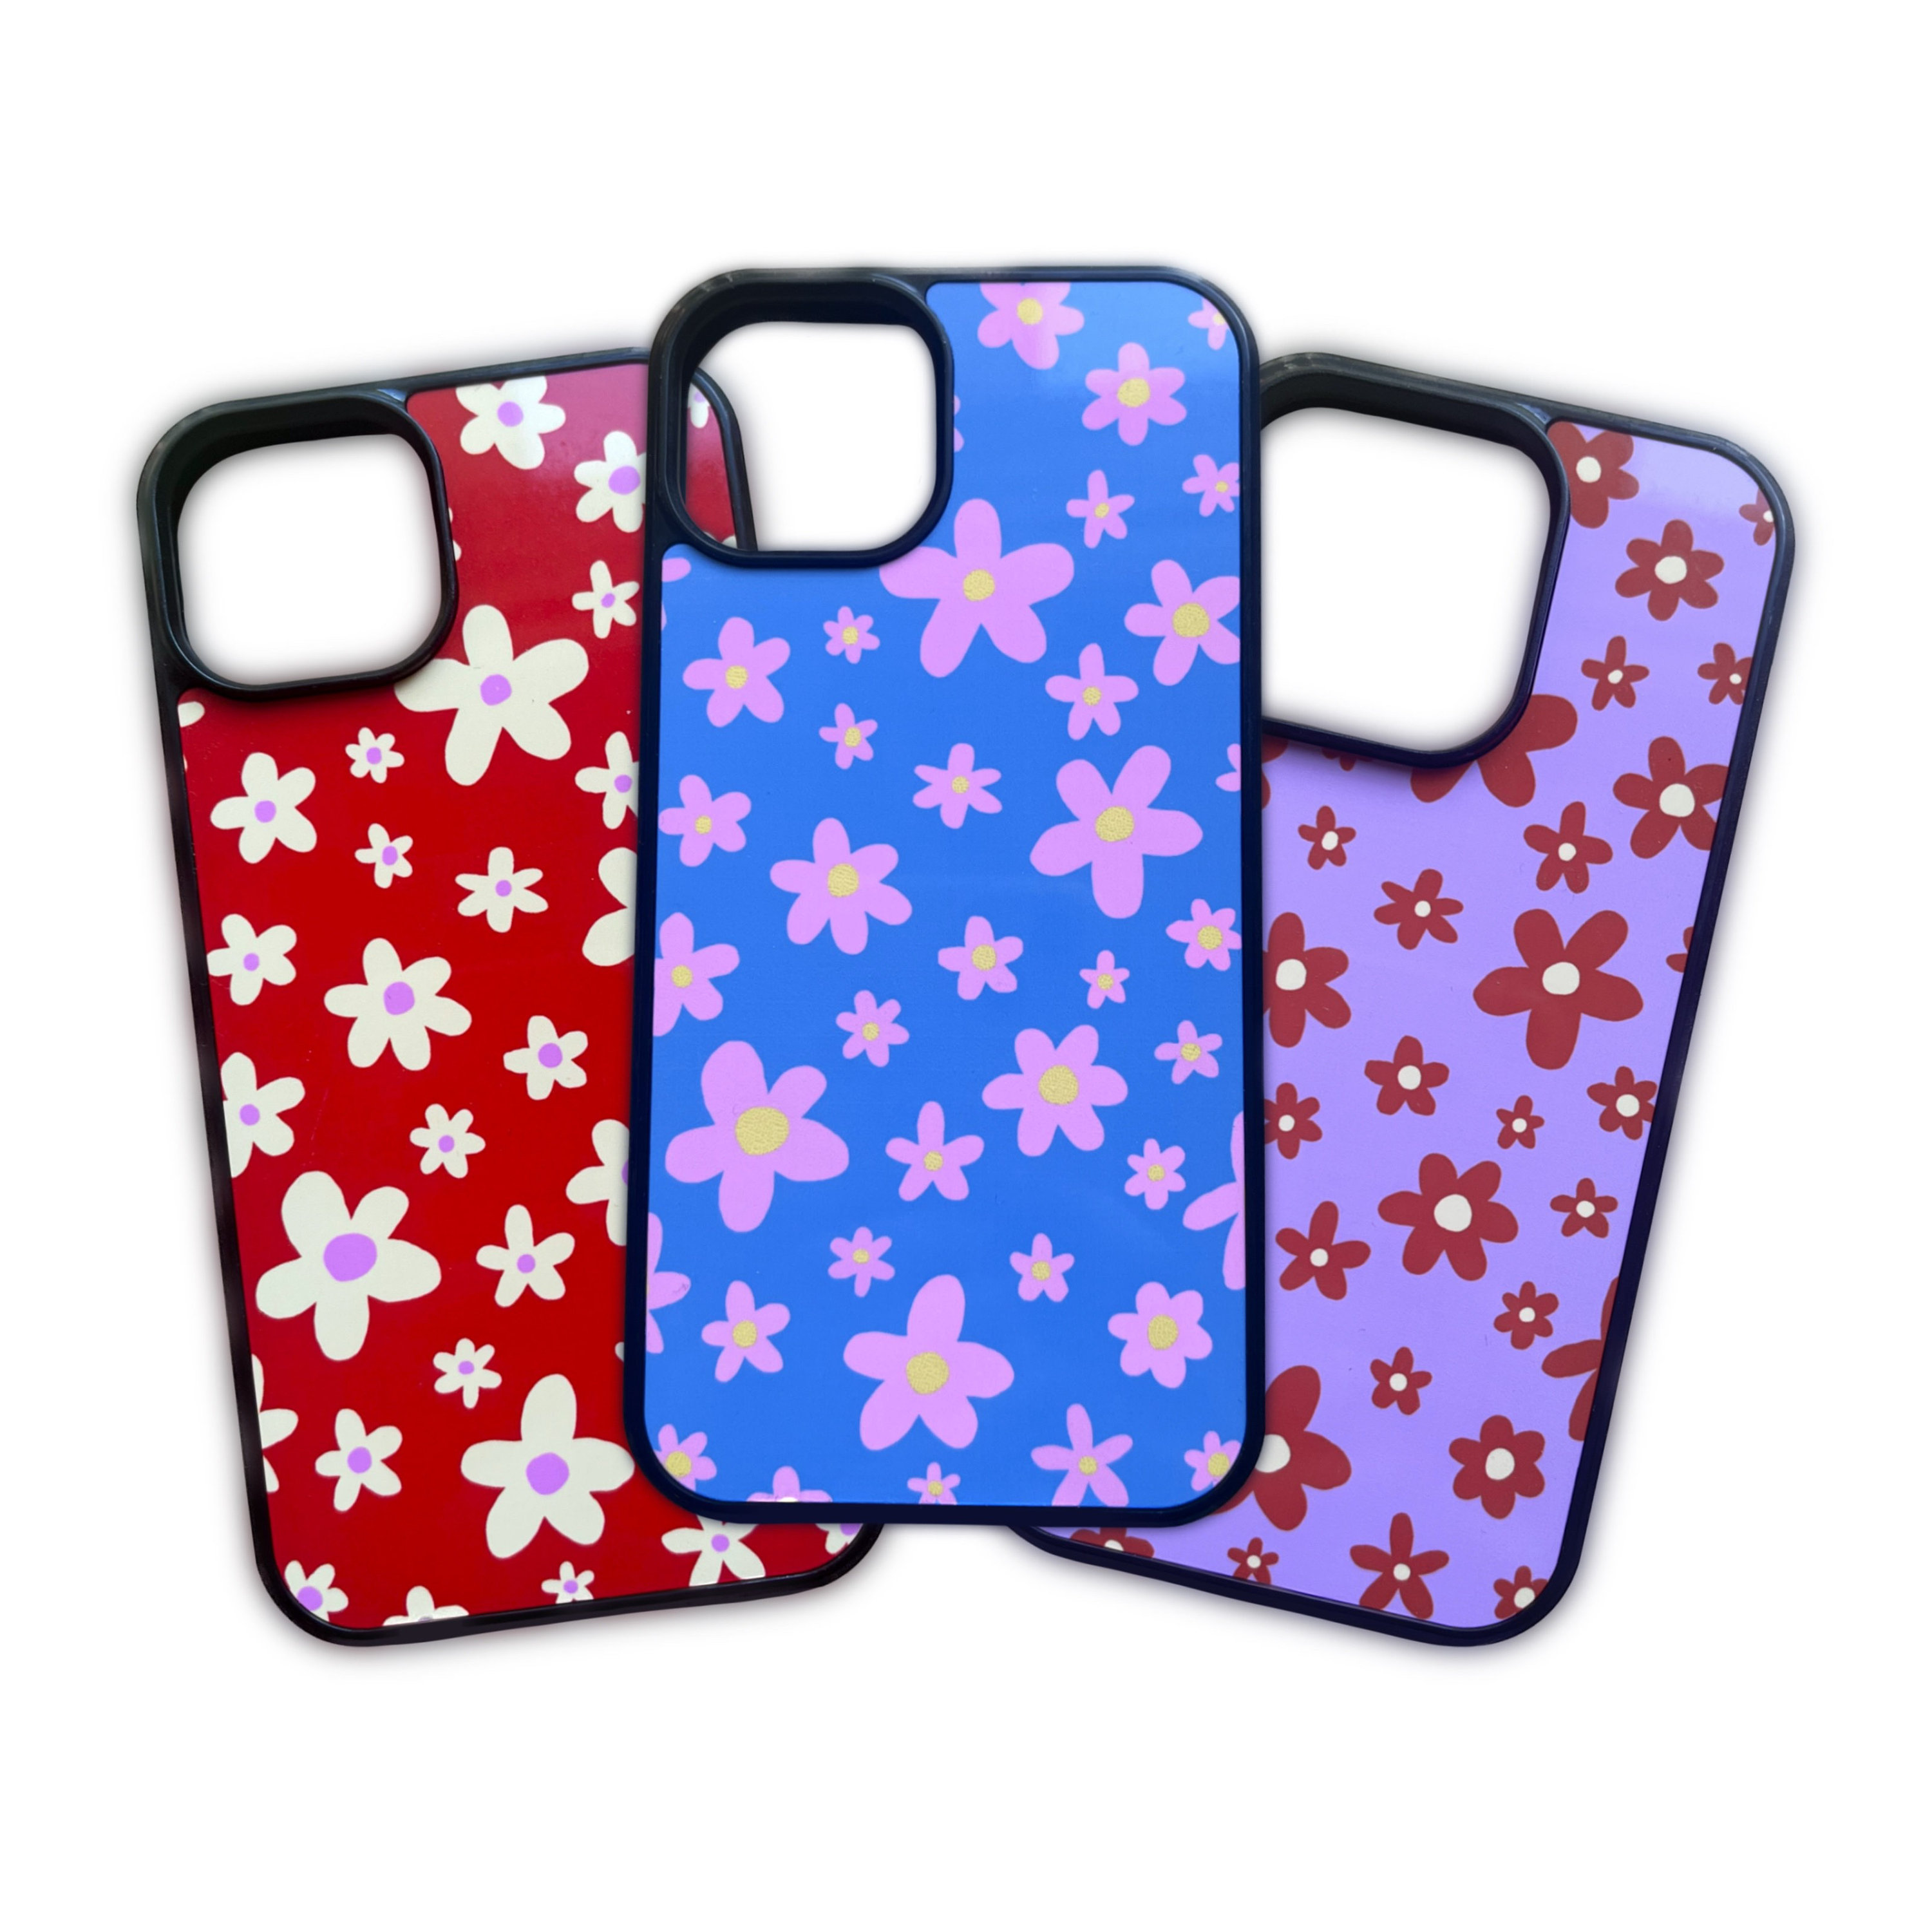 Blue, Purple, and Red Flower Phone Cases || iPhone Case || Pattern Phone Case